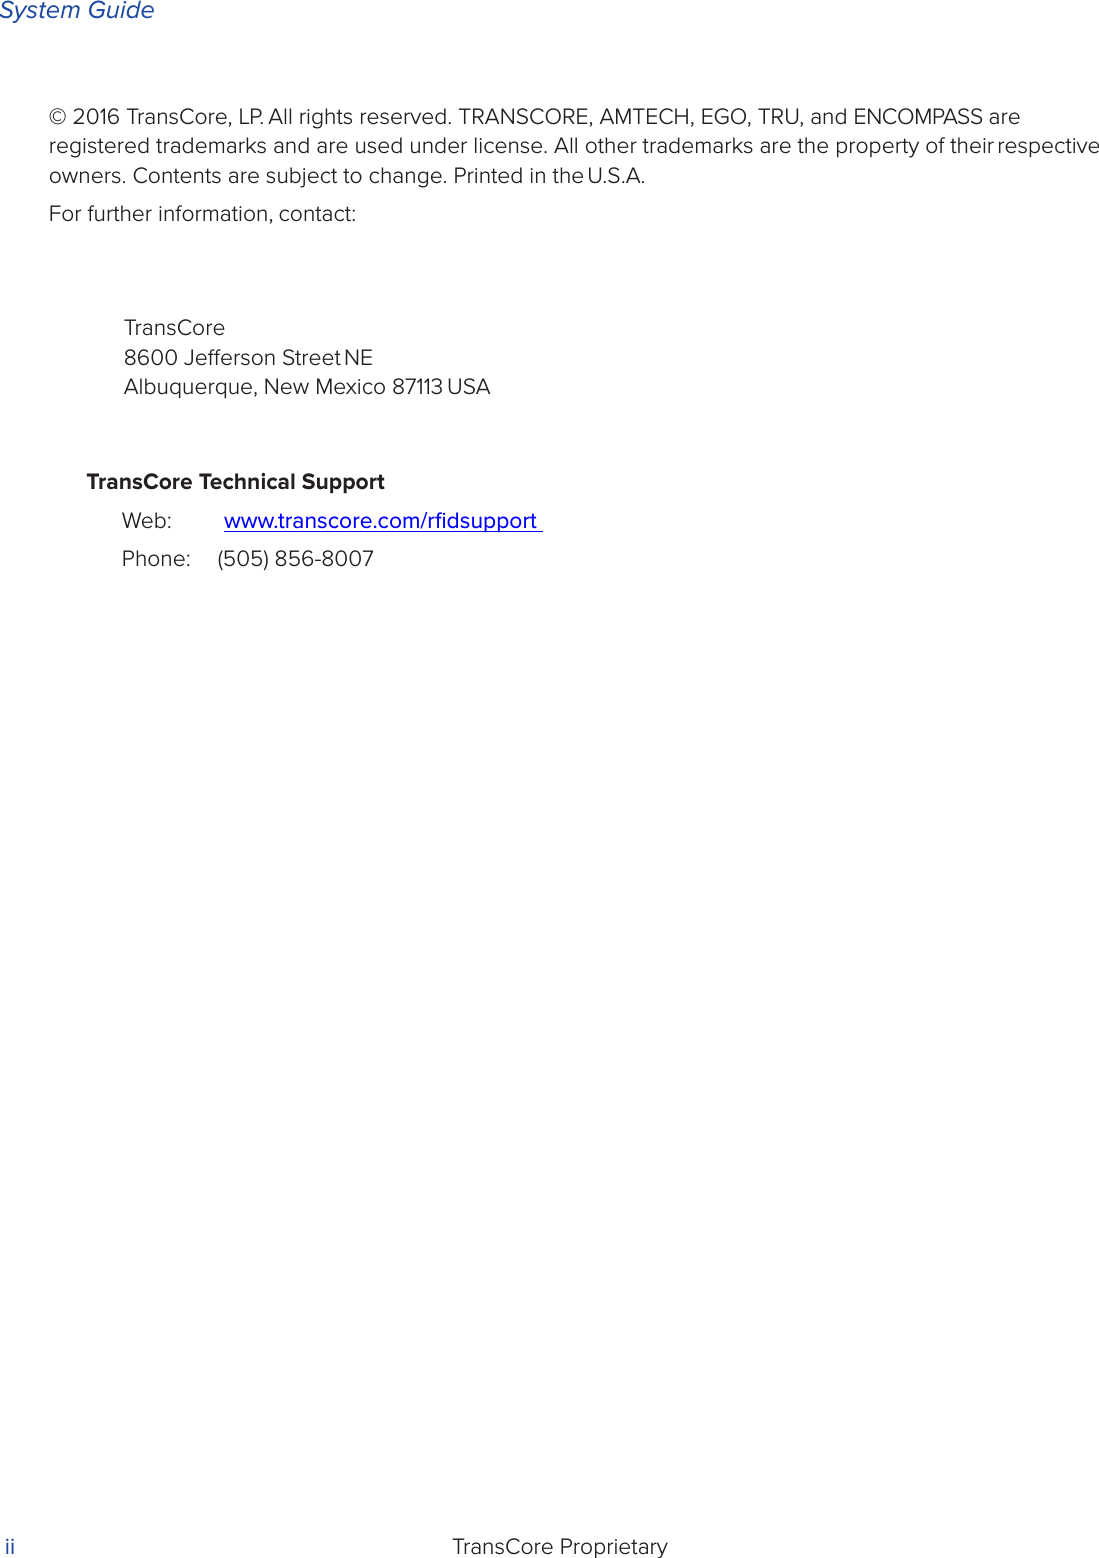 System GuideTransCore Proprietary ii© 2016 TransCore, LP. All rights reserved. TRANSCORE, AMTECH, EGO, TRU, and ENCOMPASS are registered trademarks and are used under license. All other trademarks are the property of their respective owners. Contents are subject to change. Printed in the U.S.A.For further information, contact:TransCore8600 Jeerson Street NEAlbuquerque, New Mexico 87113 USATransCore Technical SupportWeb:  www.transcore.com/rﬁdsupport Phone:  (505) 856-8007